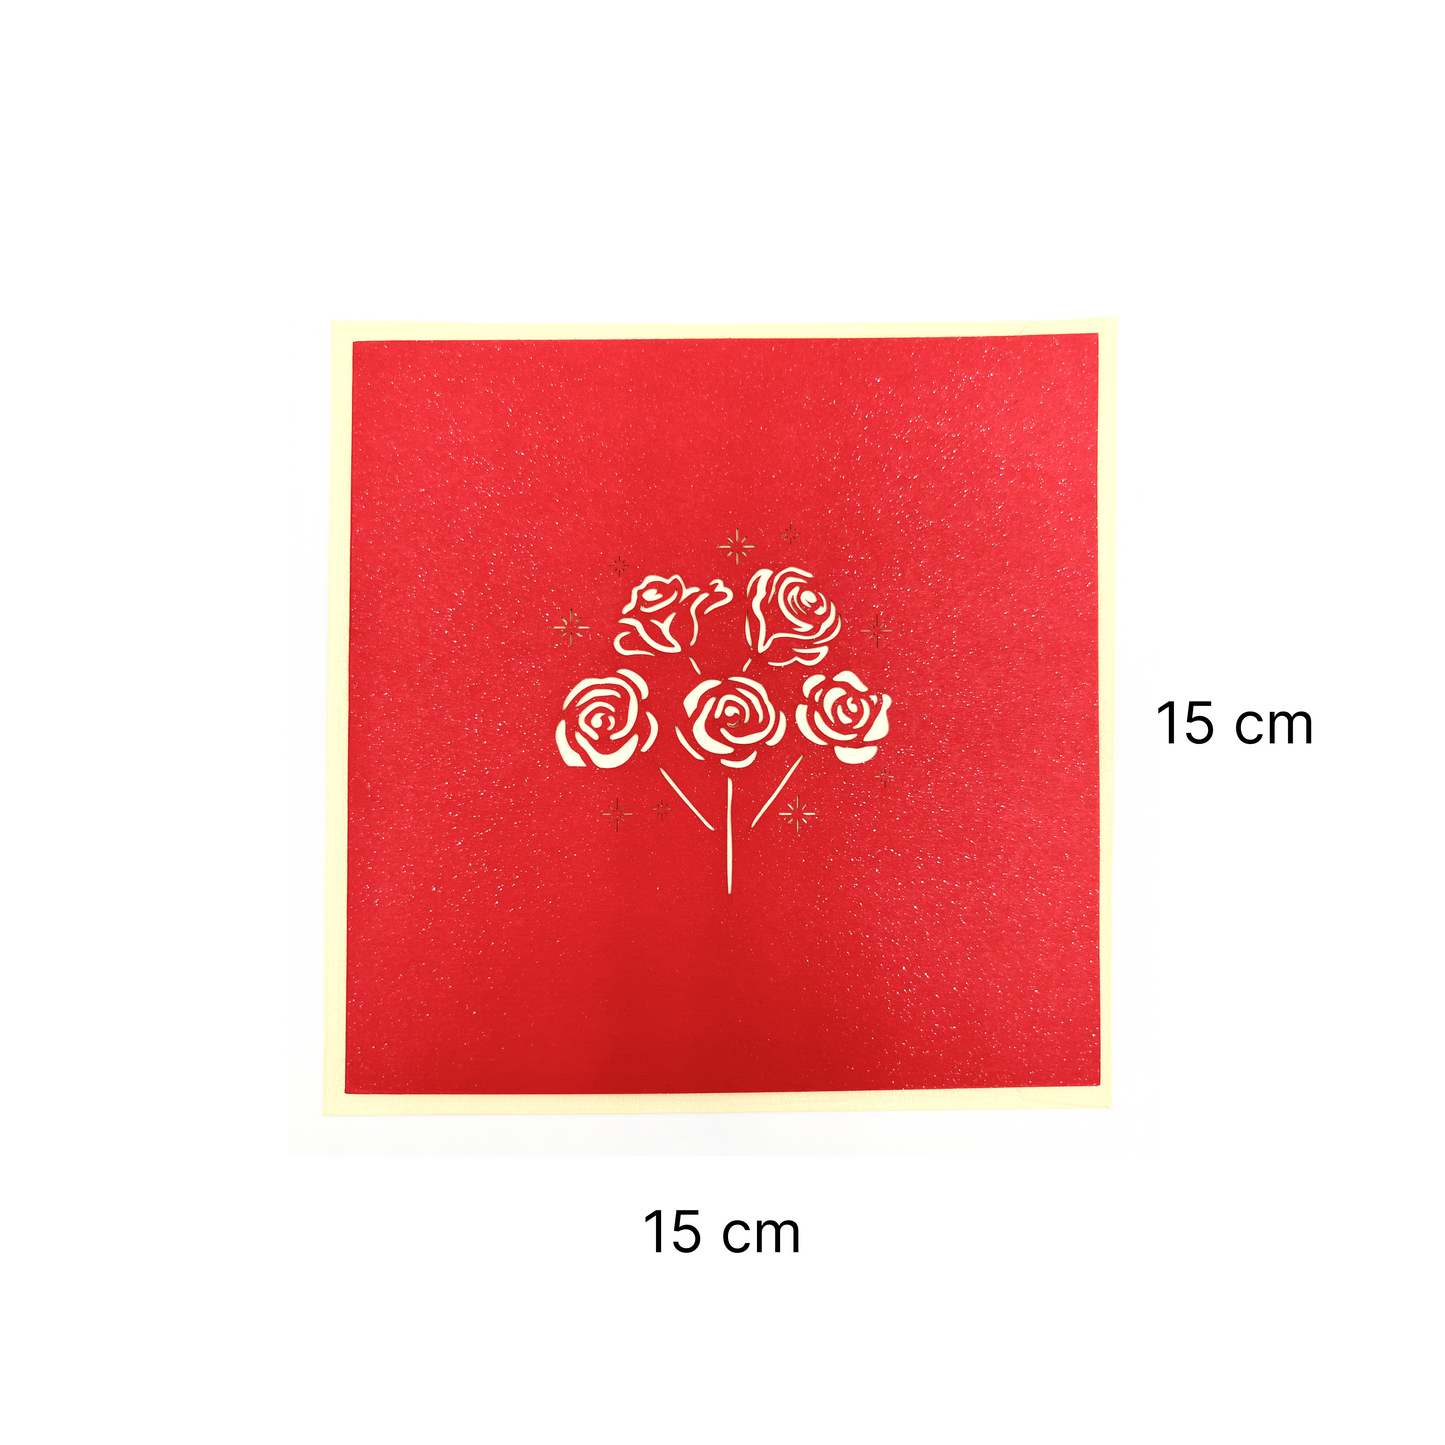 A1 - Rose 3D Pop Up Greeting Card With Envelope